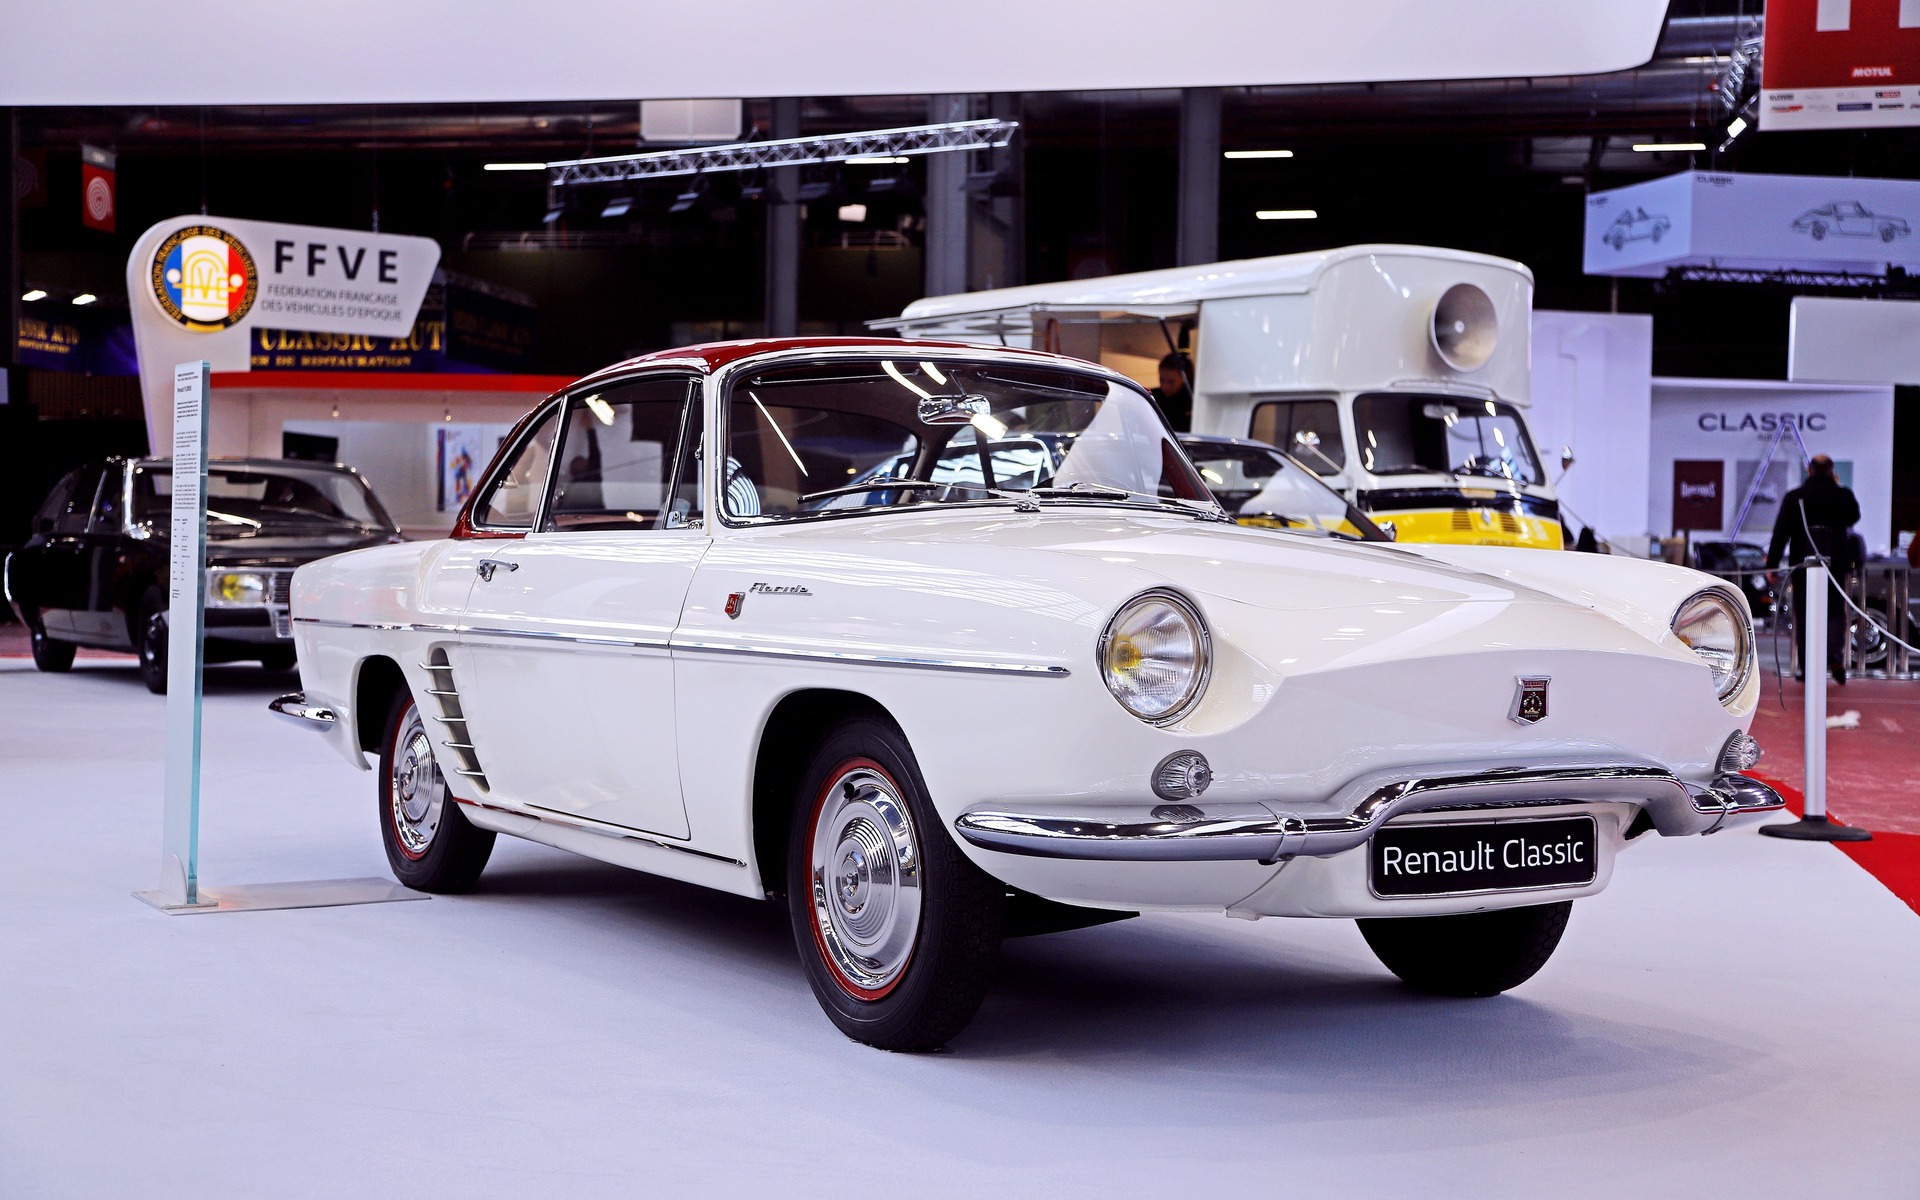 <p><strong>1961 Renault Floride </strong></p>